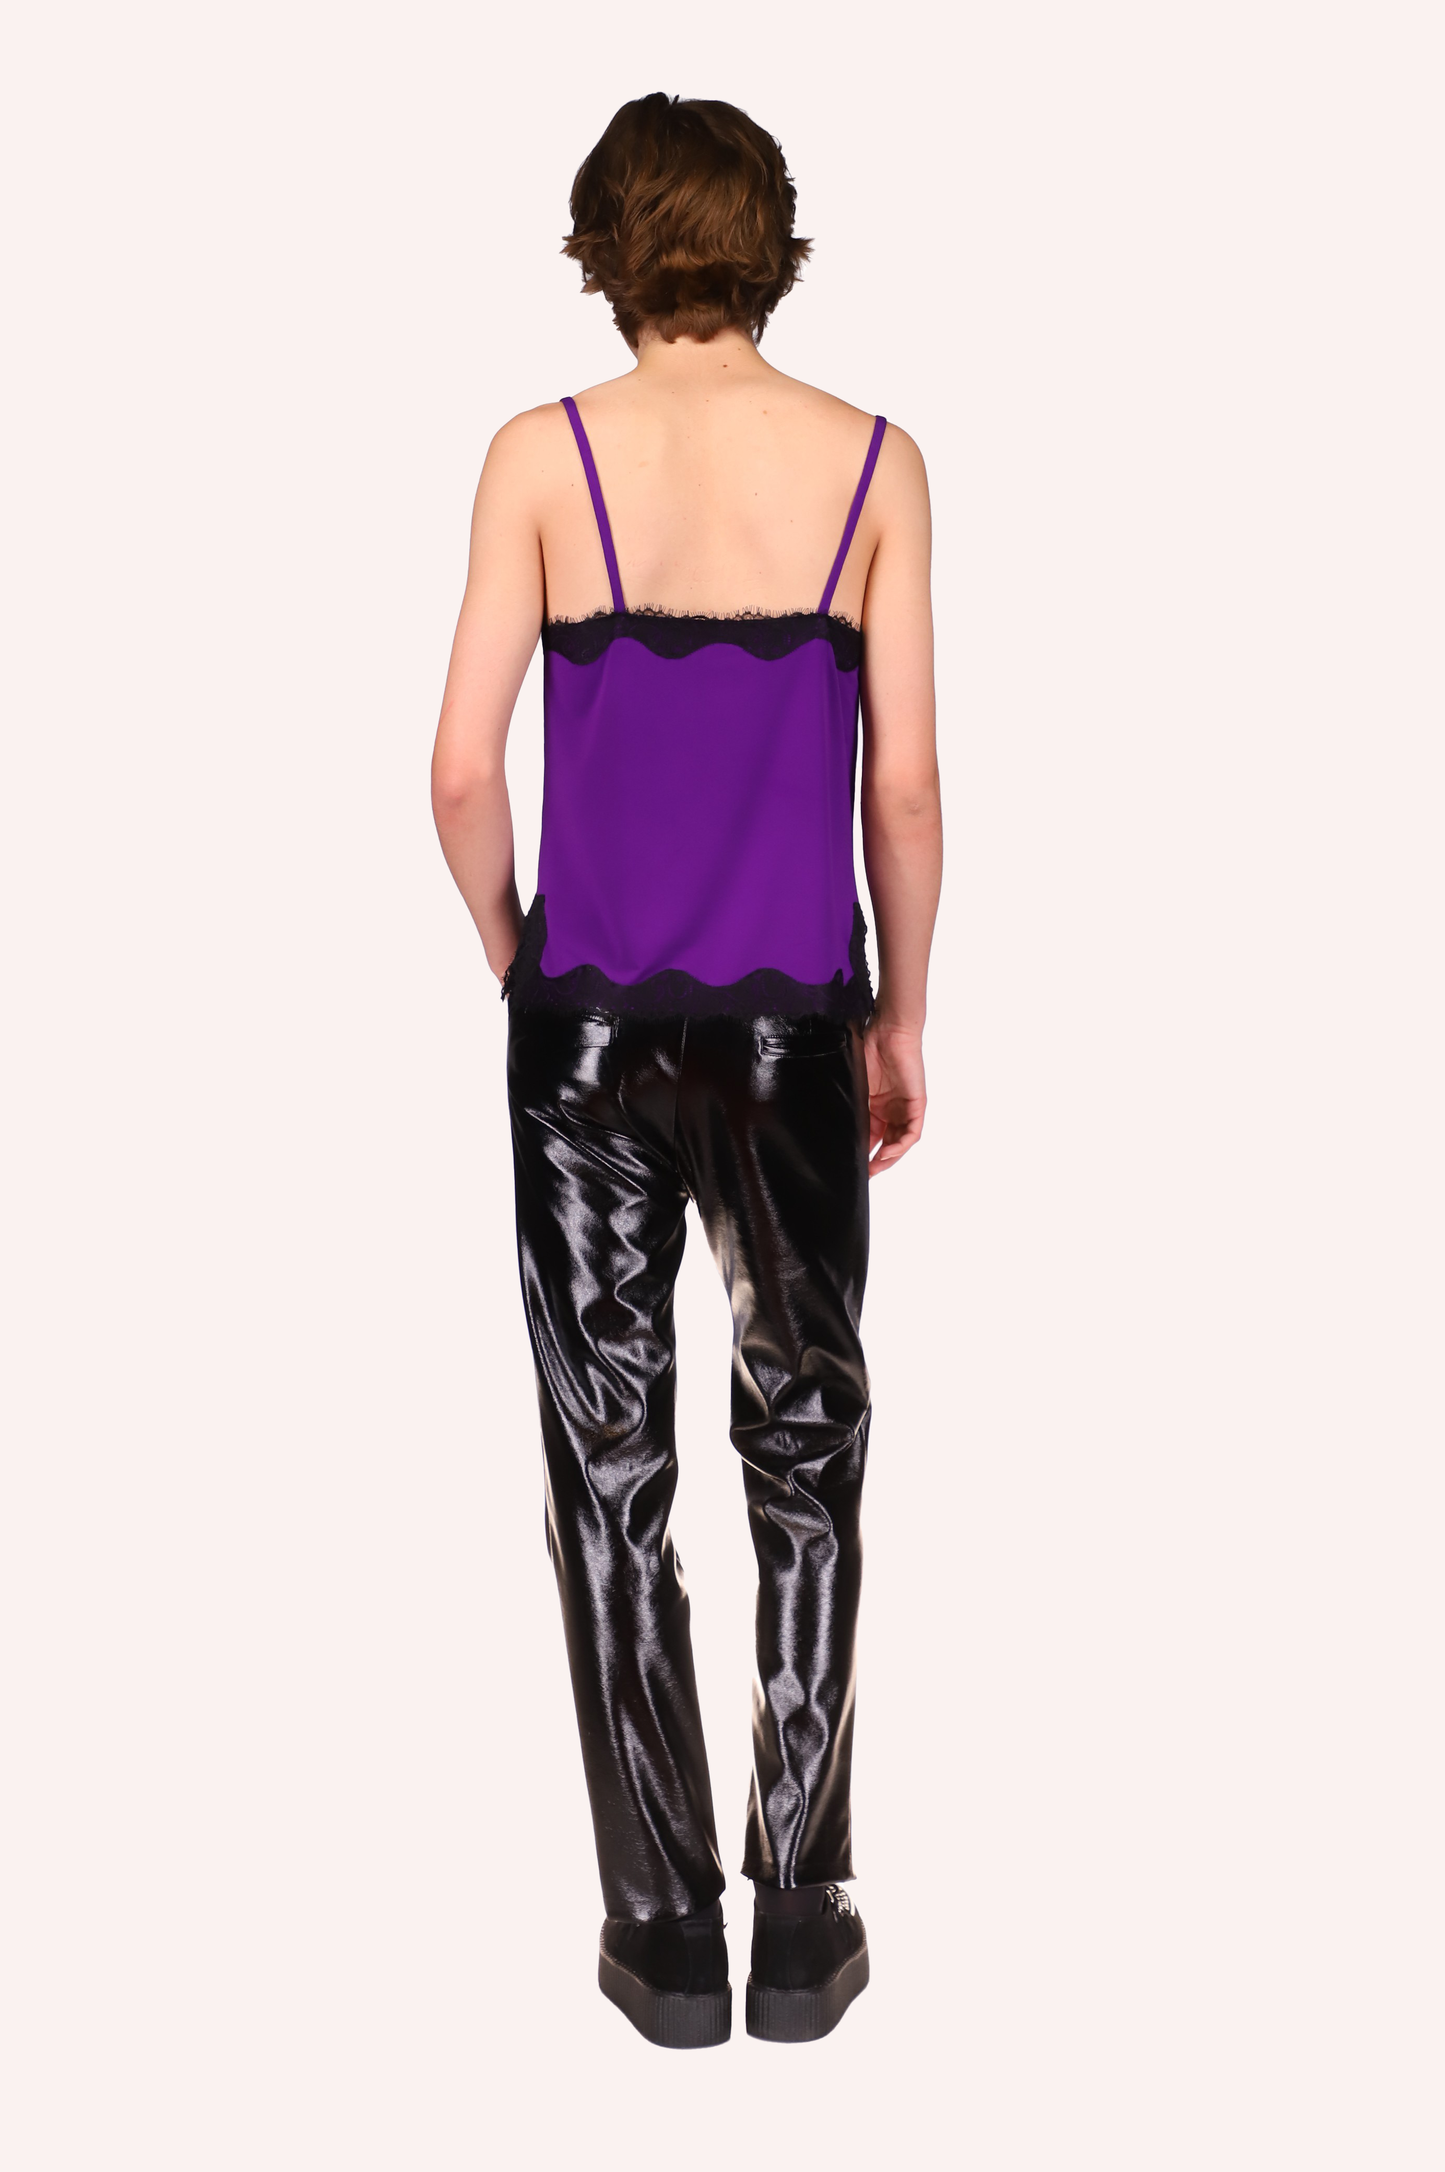 These genderless black patent pants can be worn with an Anna Sui camisole and shoes.